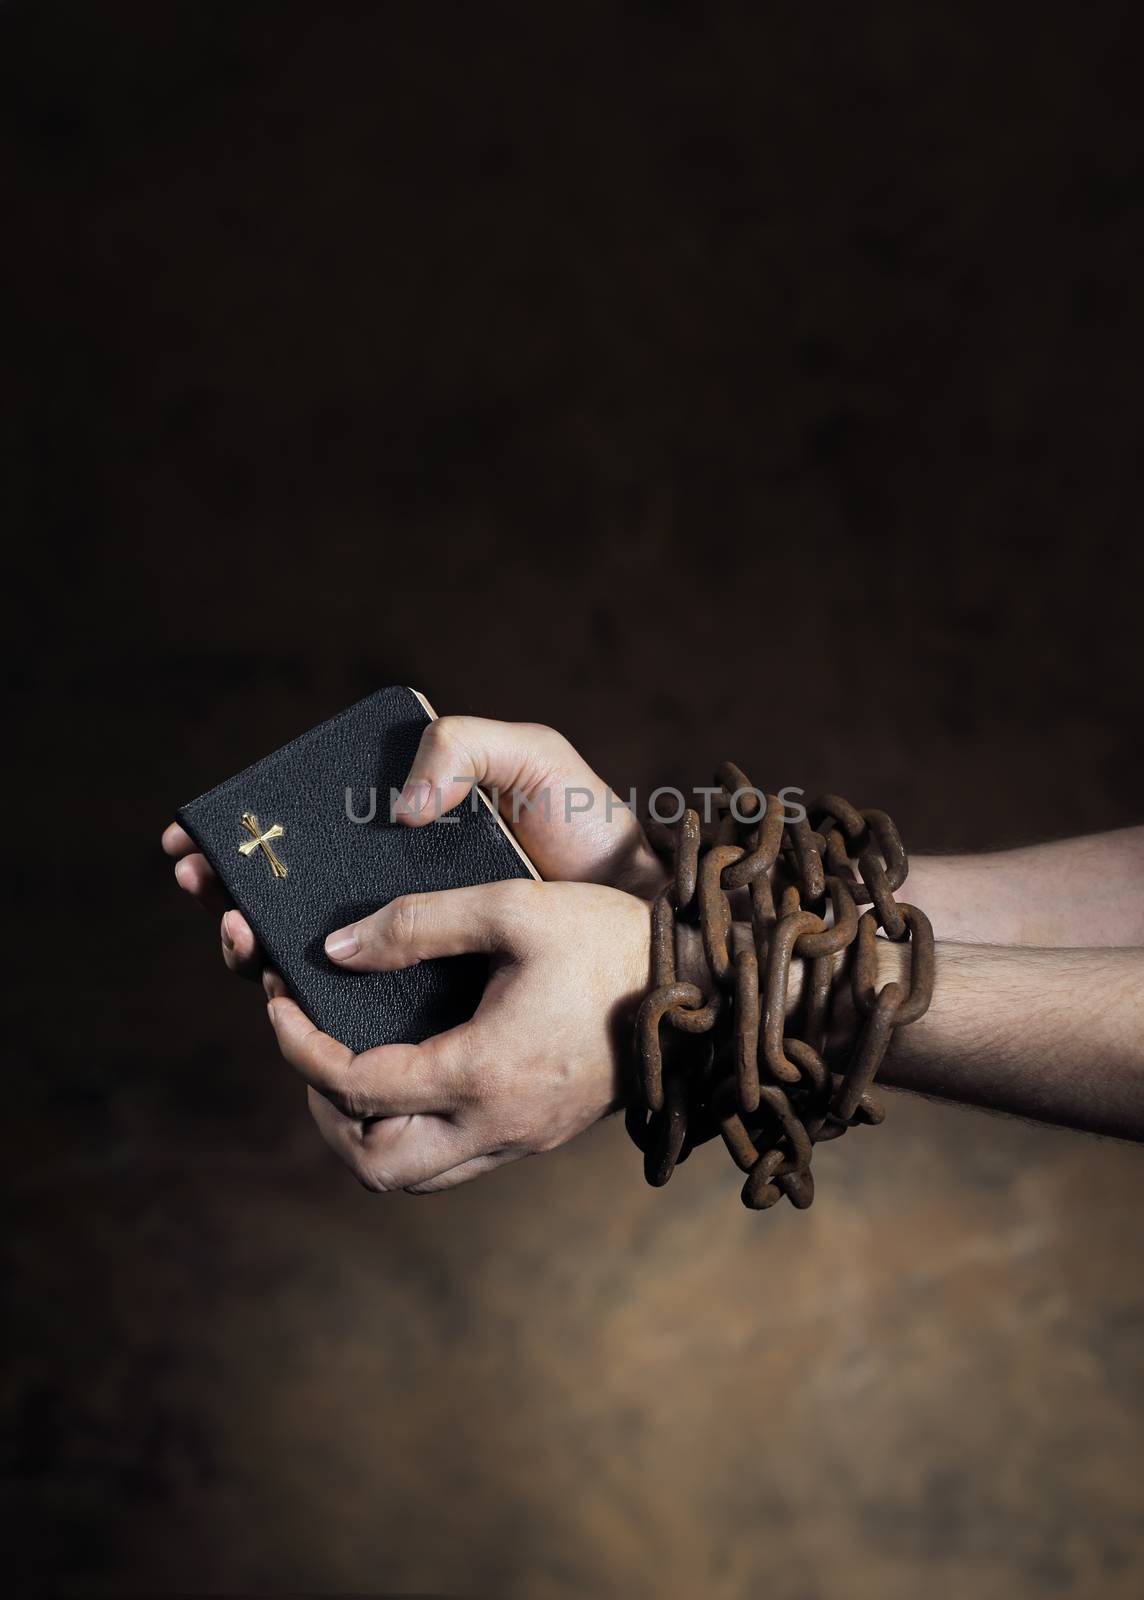 Hands holding a bible tied together with an old rusty chain.